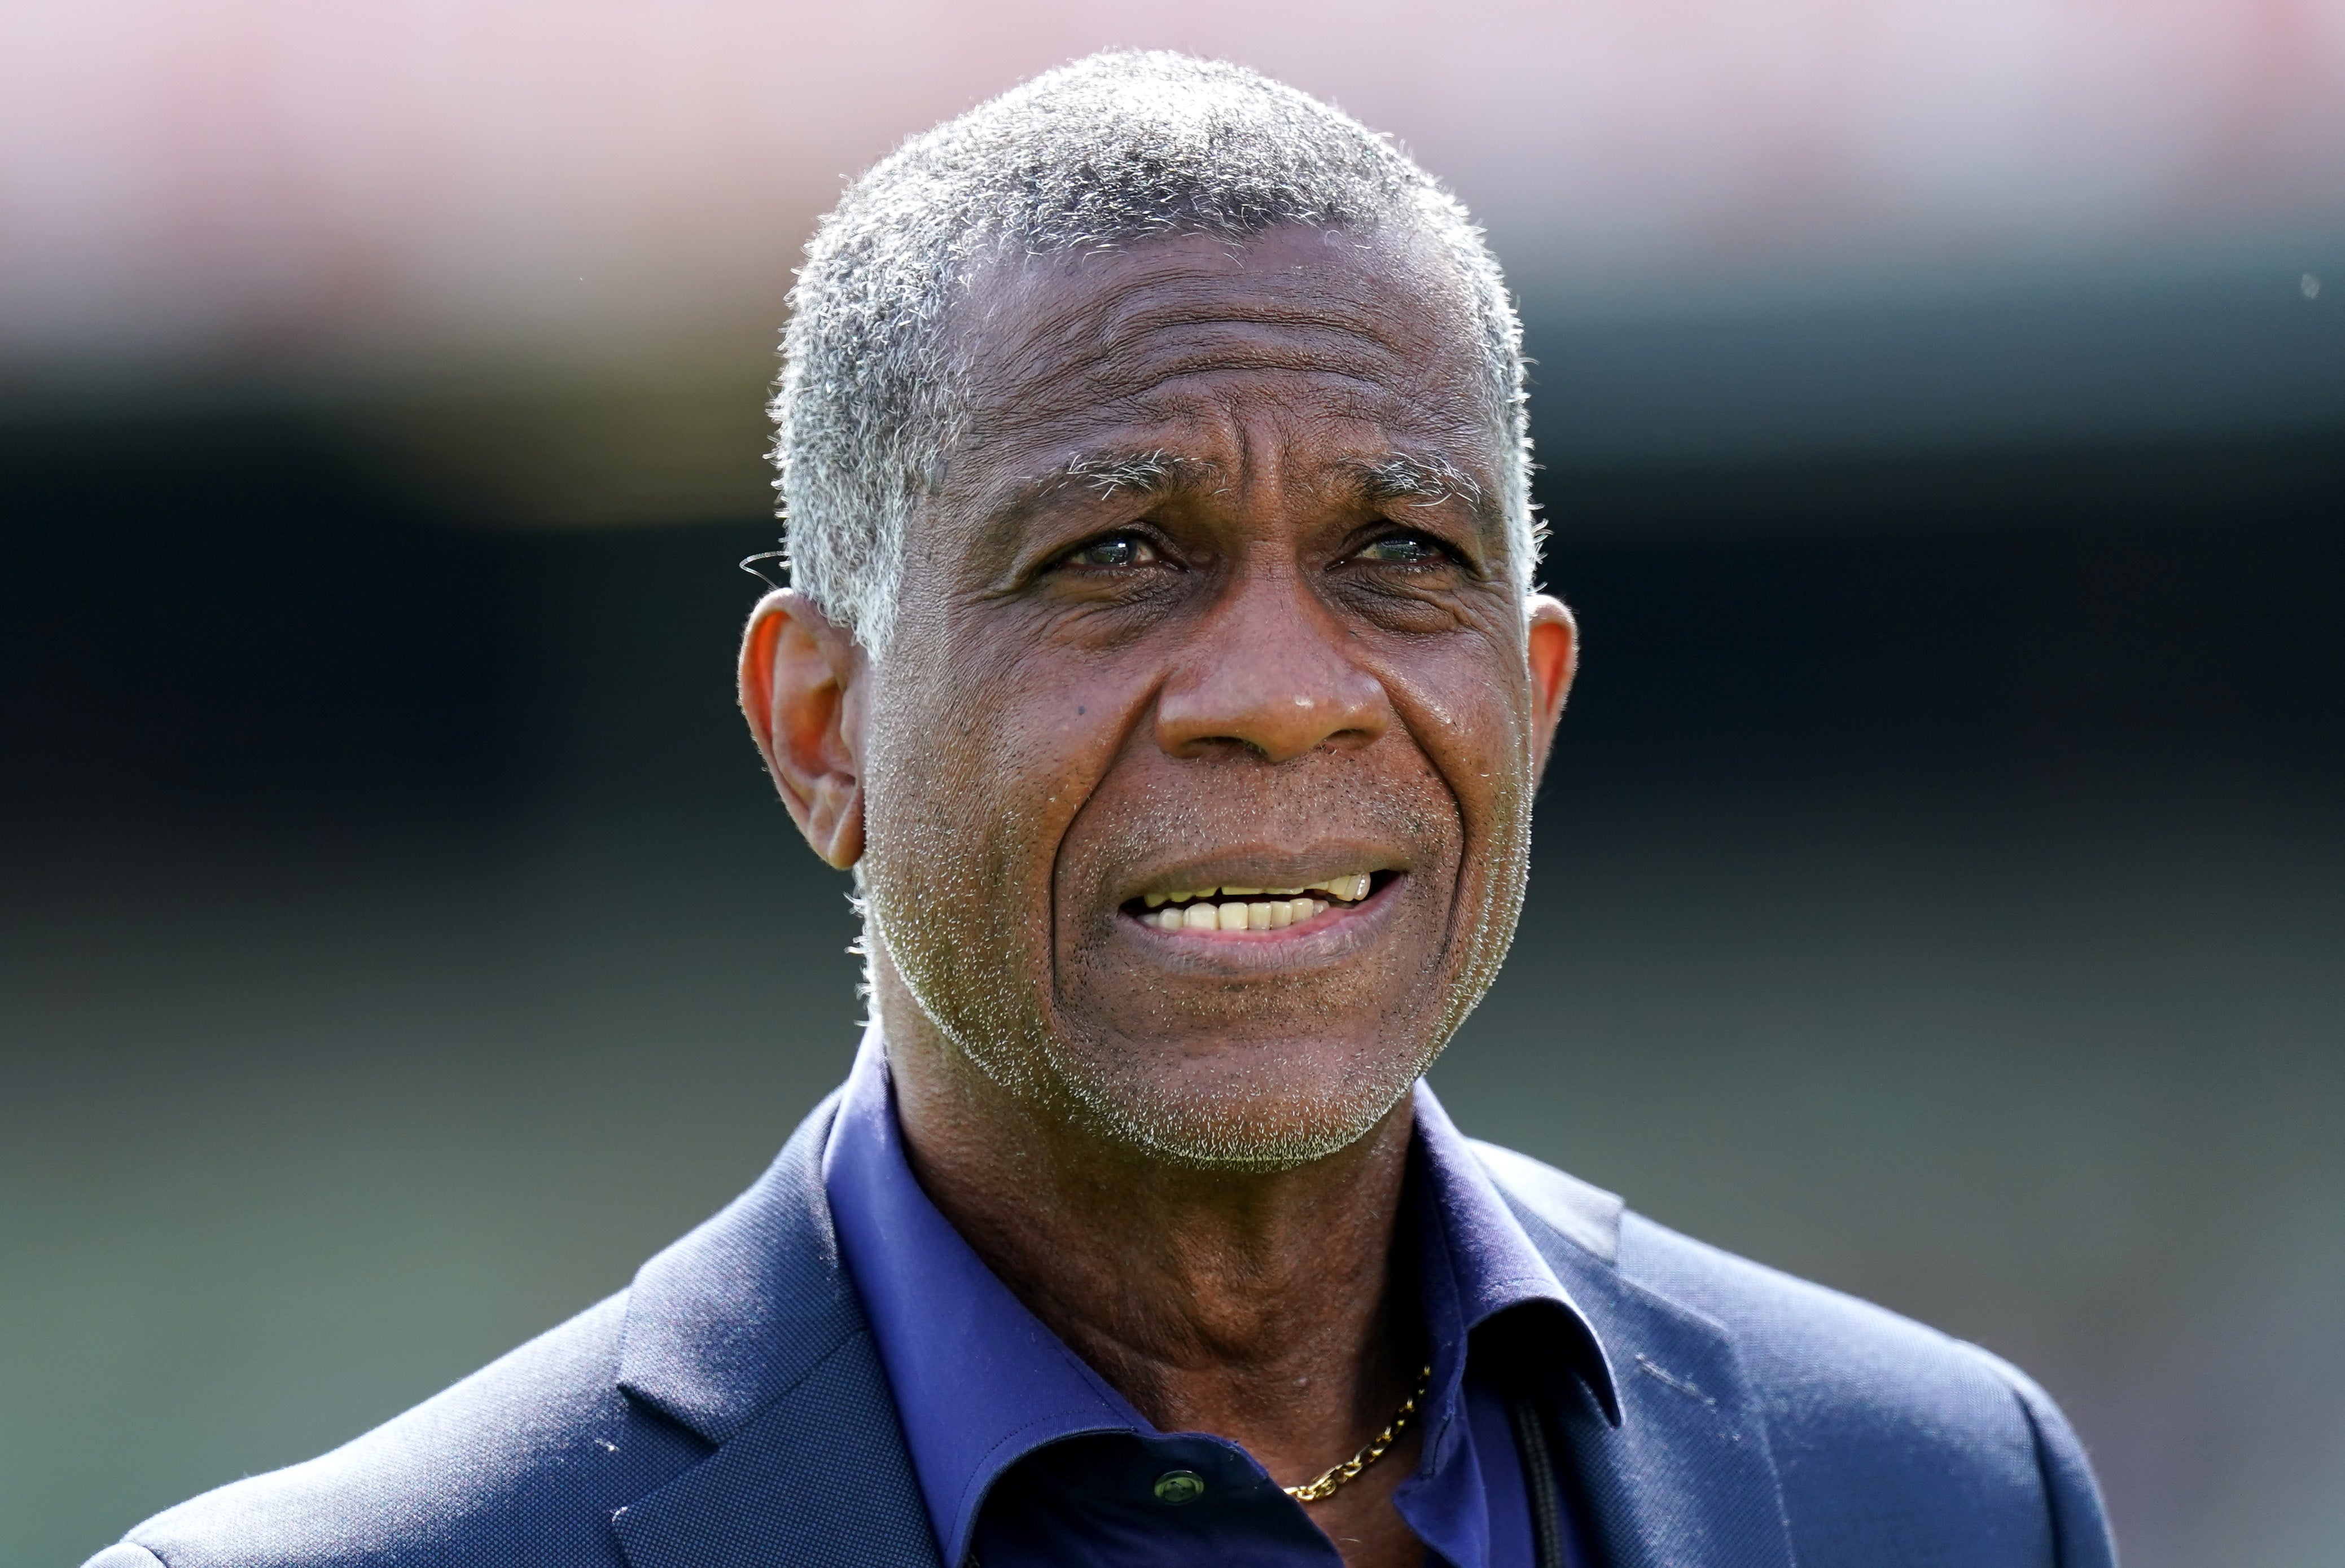 Michael Holding has written a book called 'Why We Kneel, How We Rise'